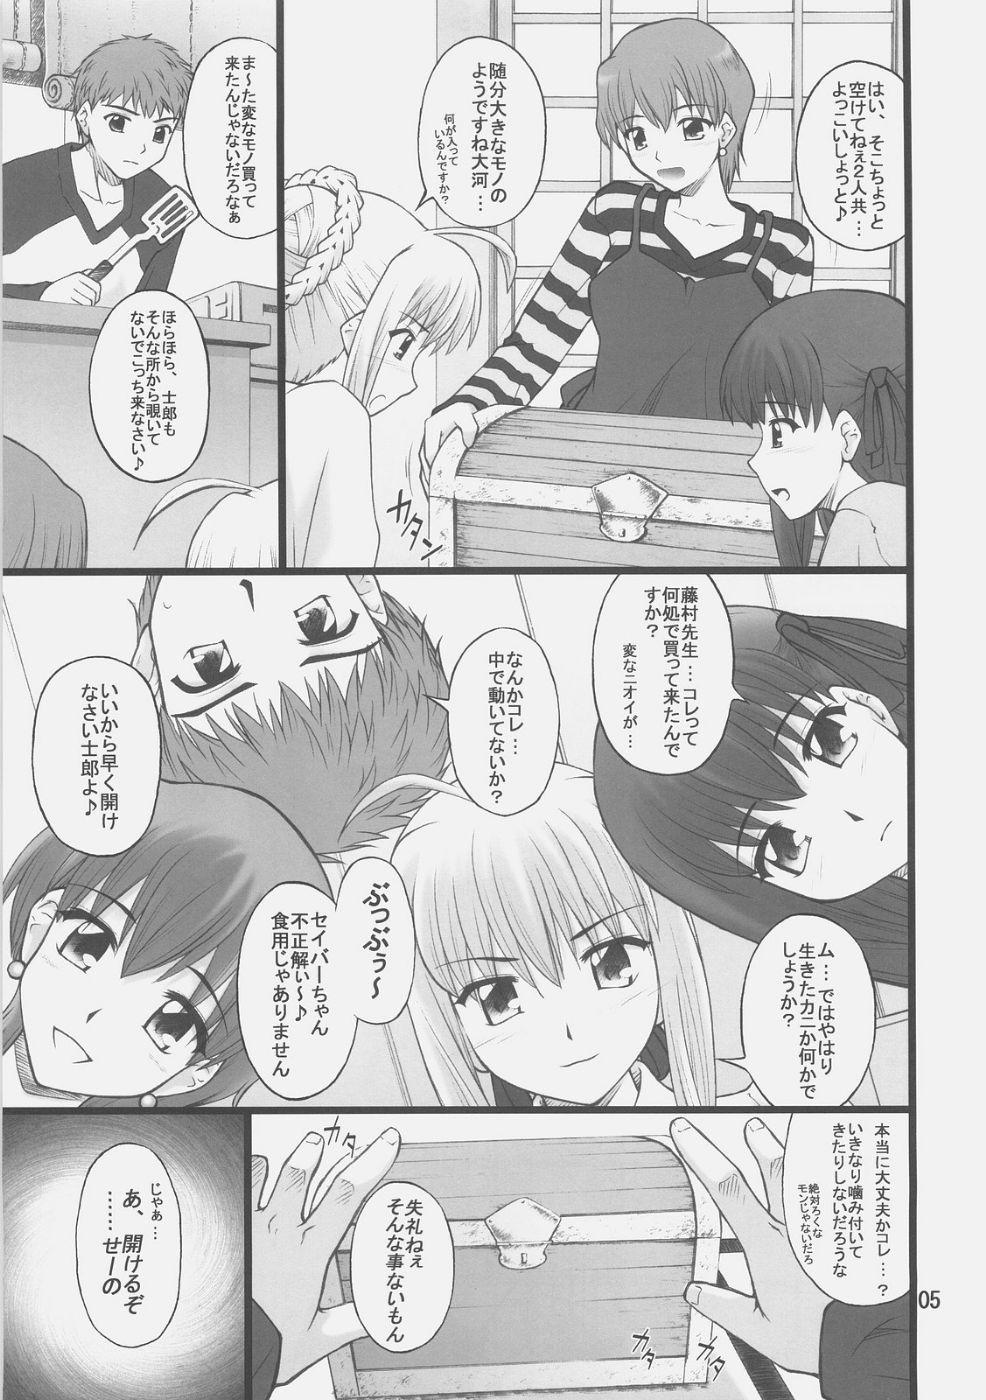 Mamada Grem-Rin 1 - Fate stay night All Natural - Page 4